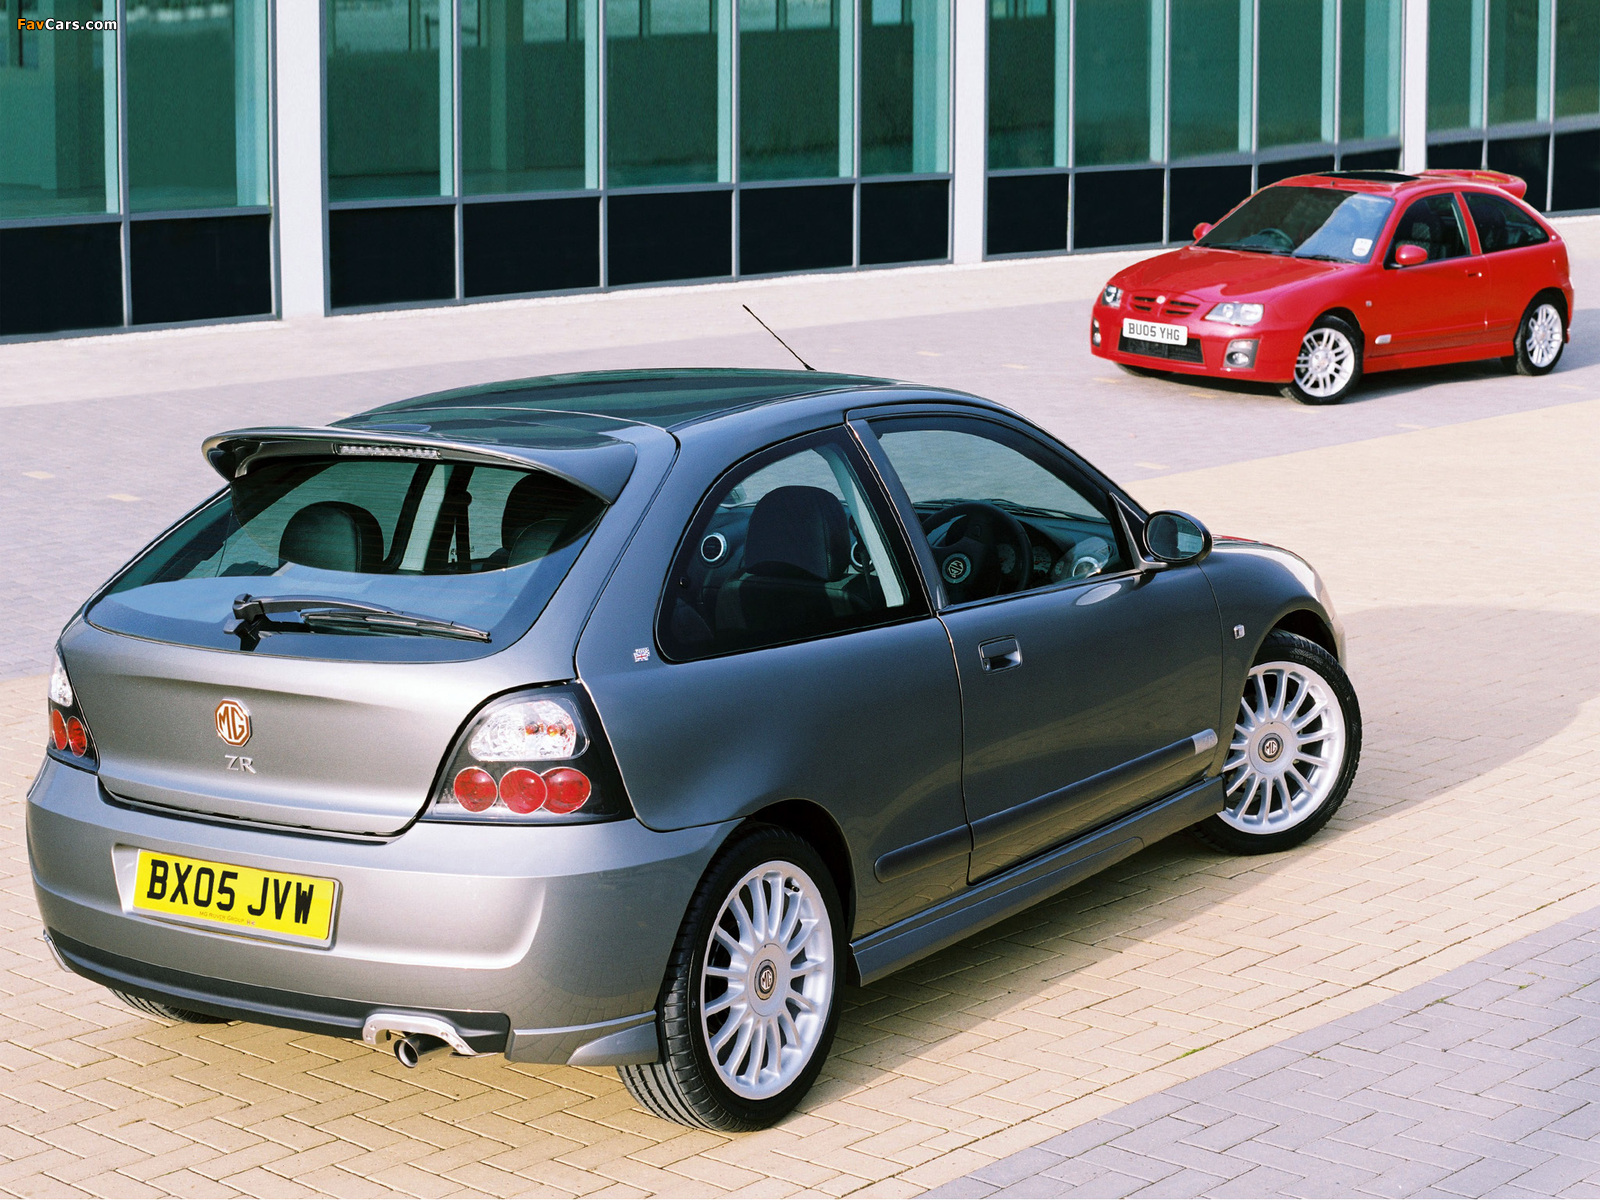 Images of MG ZR (1600 x 1200)